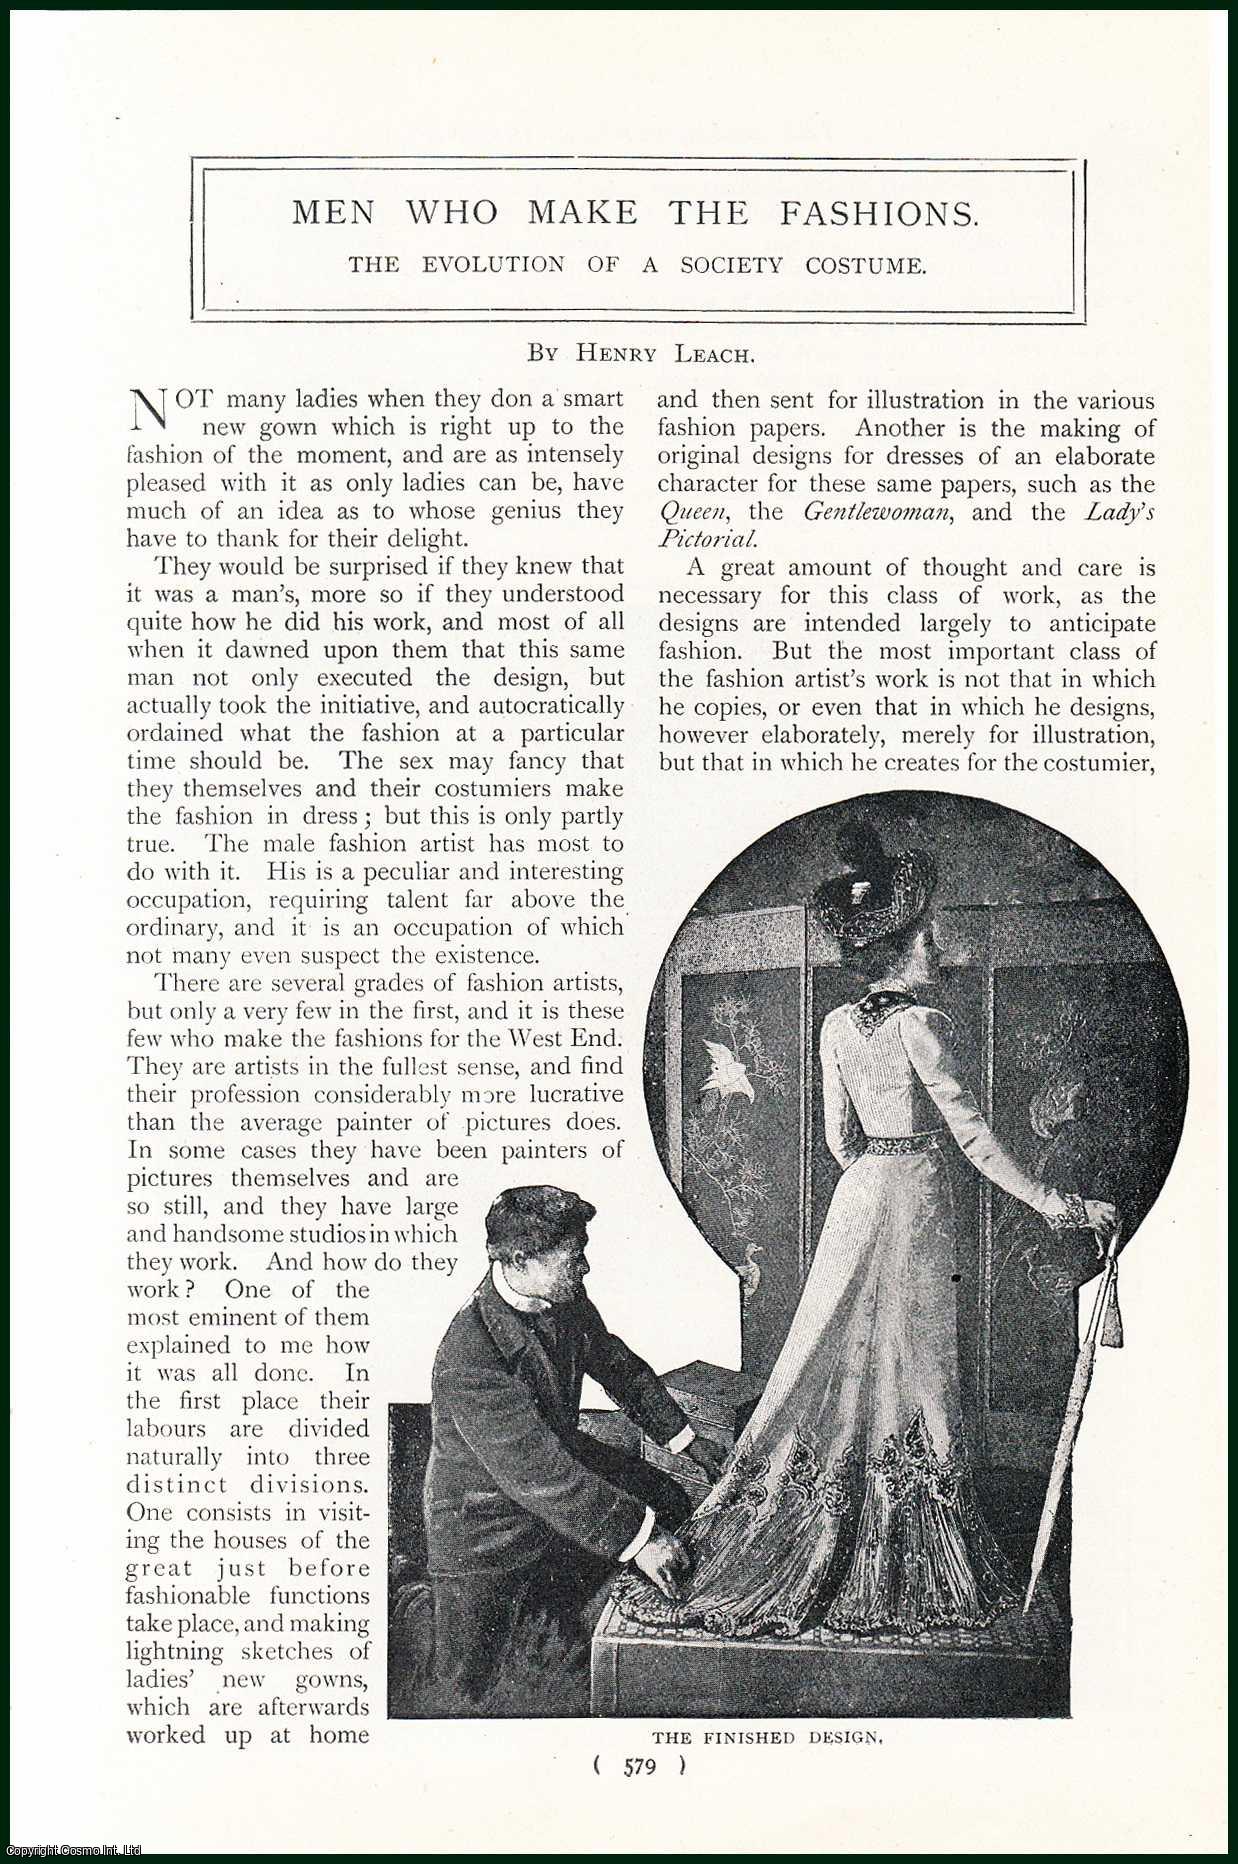 Henry Leach - Mr. Ernest Vincent, Who Has No Superior In His Profession, & Who Must Have Been Responsible For Some Thousands Of The Smart Frocks Which Have Dazzled London Social Functions : Men Who Make The Fashions : The Evolution of a Society Costume. An uncommon original article from the Harmsworth London Magazine, 1901.